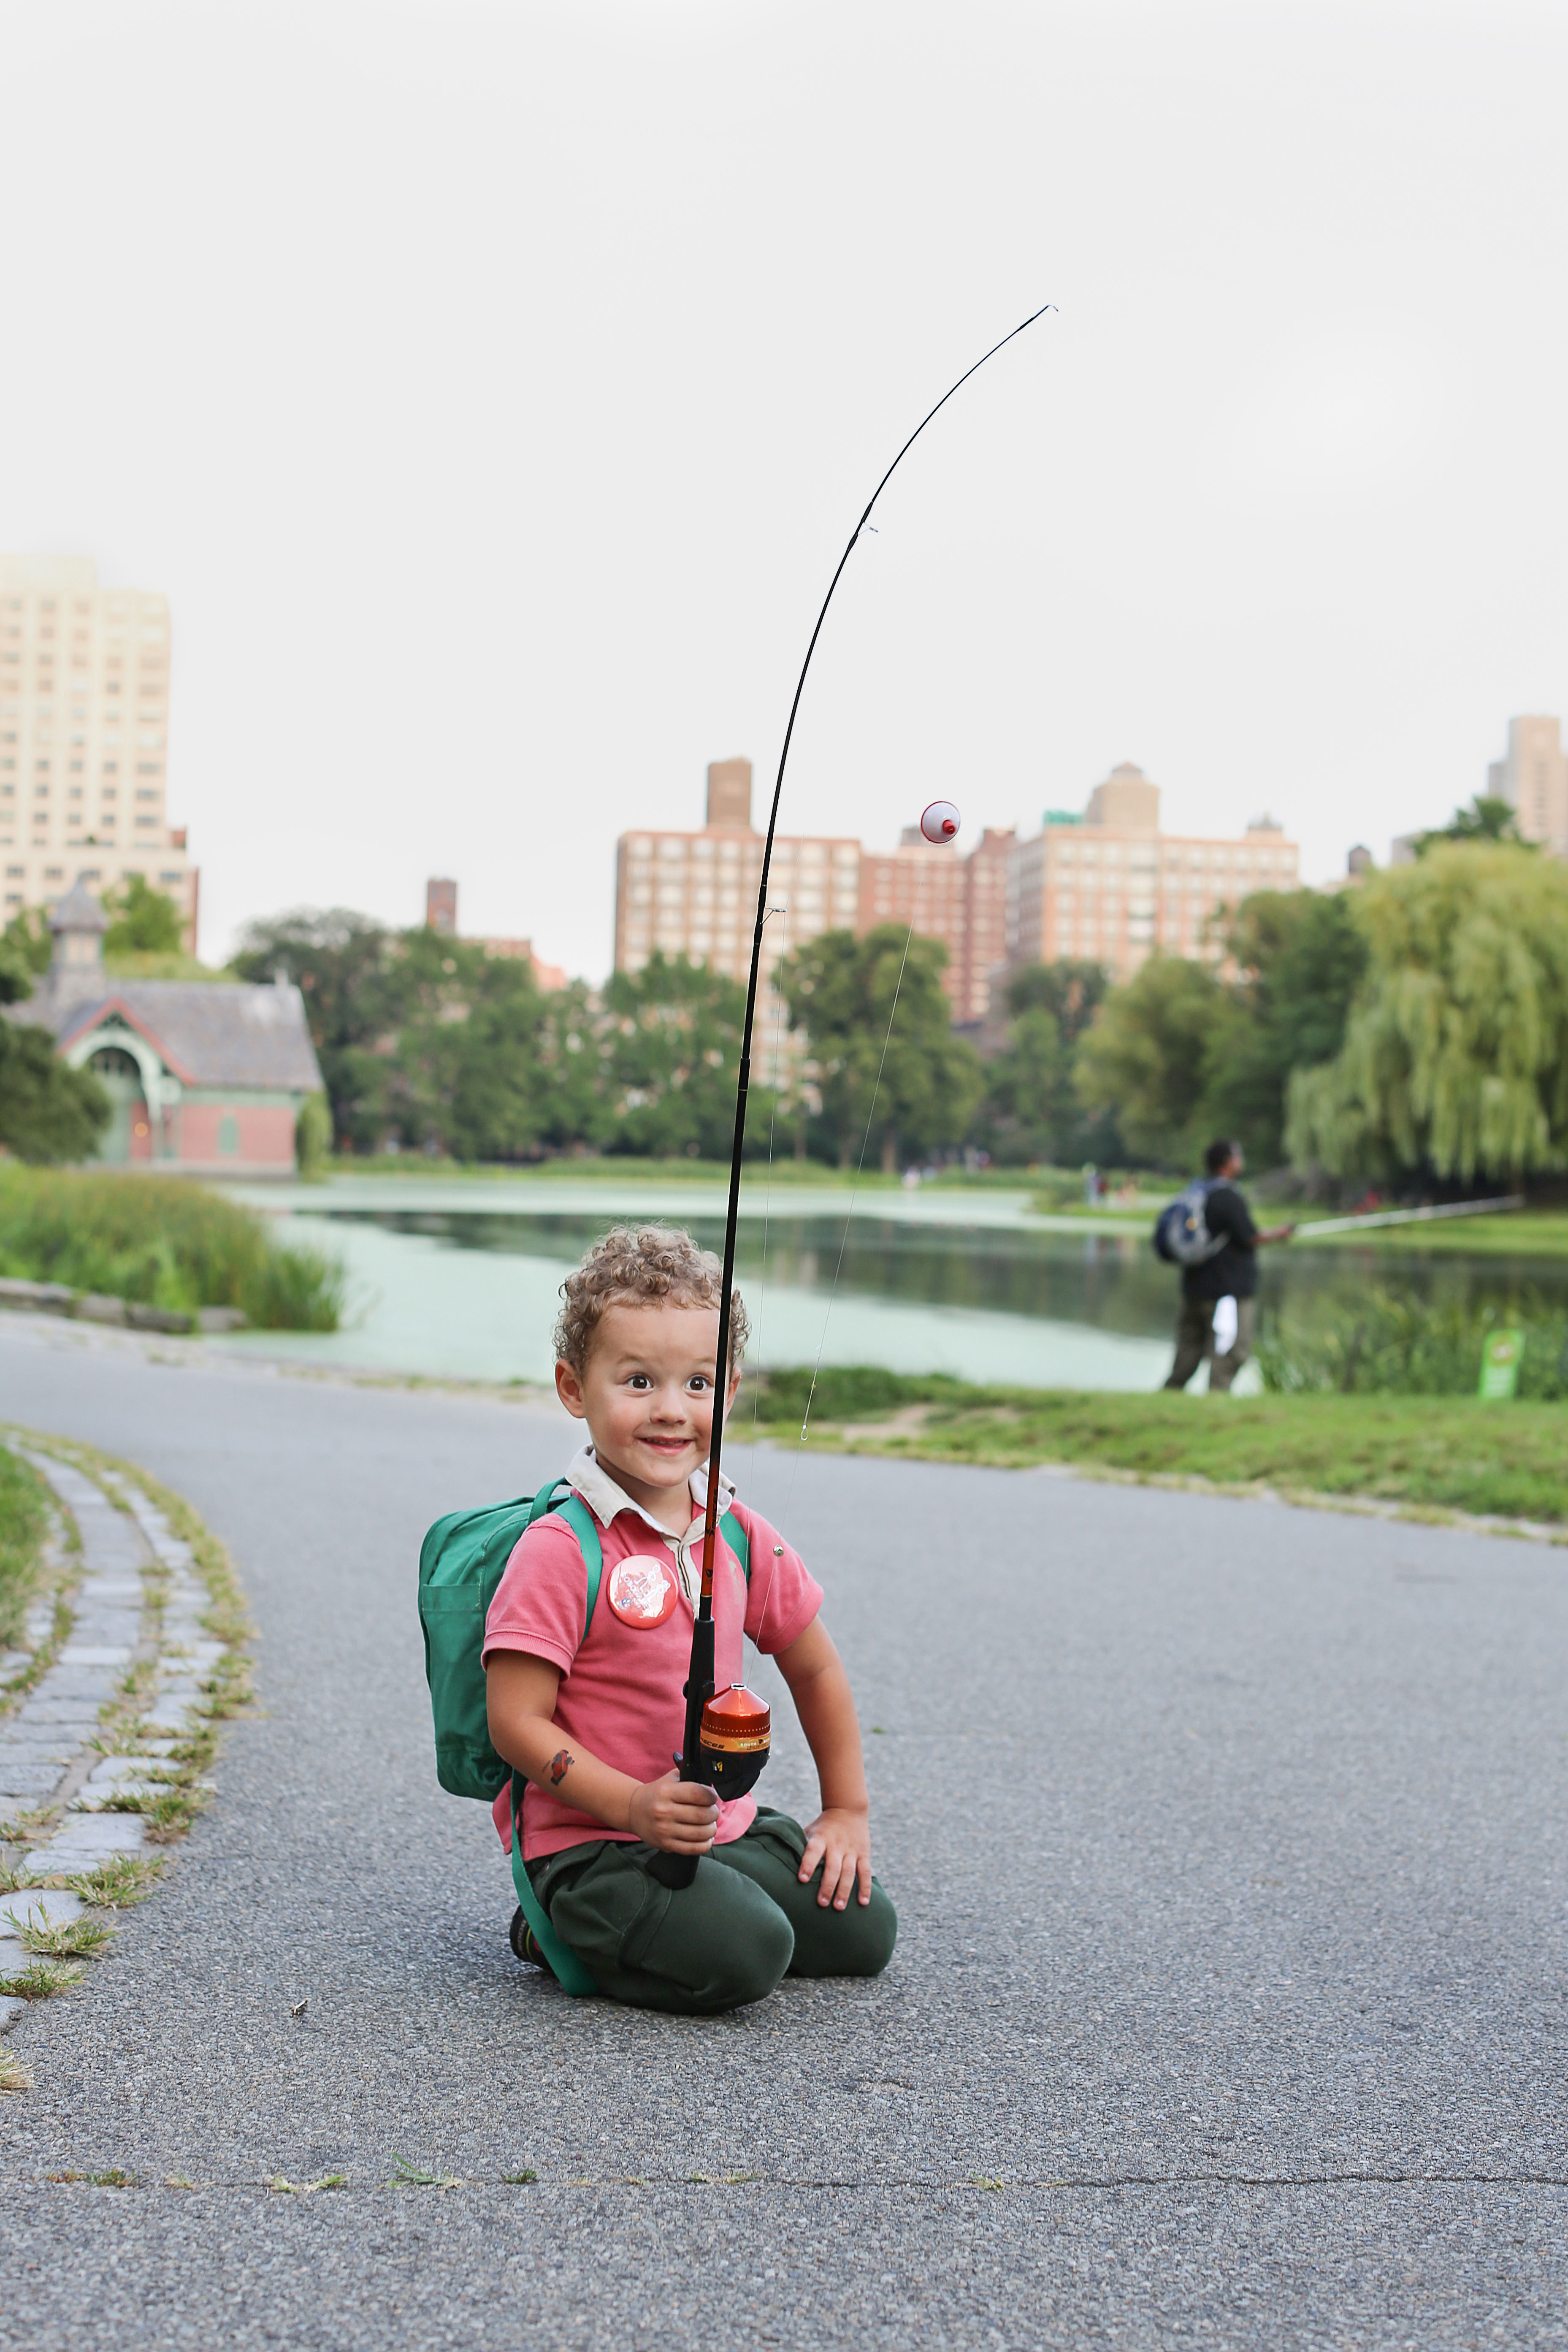 “Do you have any advice for other fishermen?”
You have to sneak up on them and catch them real fast. And you have to wear boots. I once caught a monster fish that went all the way up to the sky like a giant. I like giants. But not mean giants. I like nice giants.” (Central Park). Photo: Brandon Stanton.